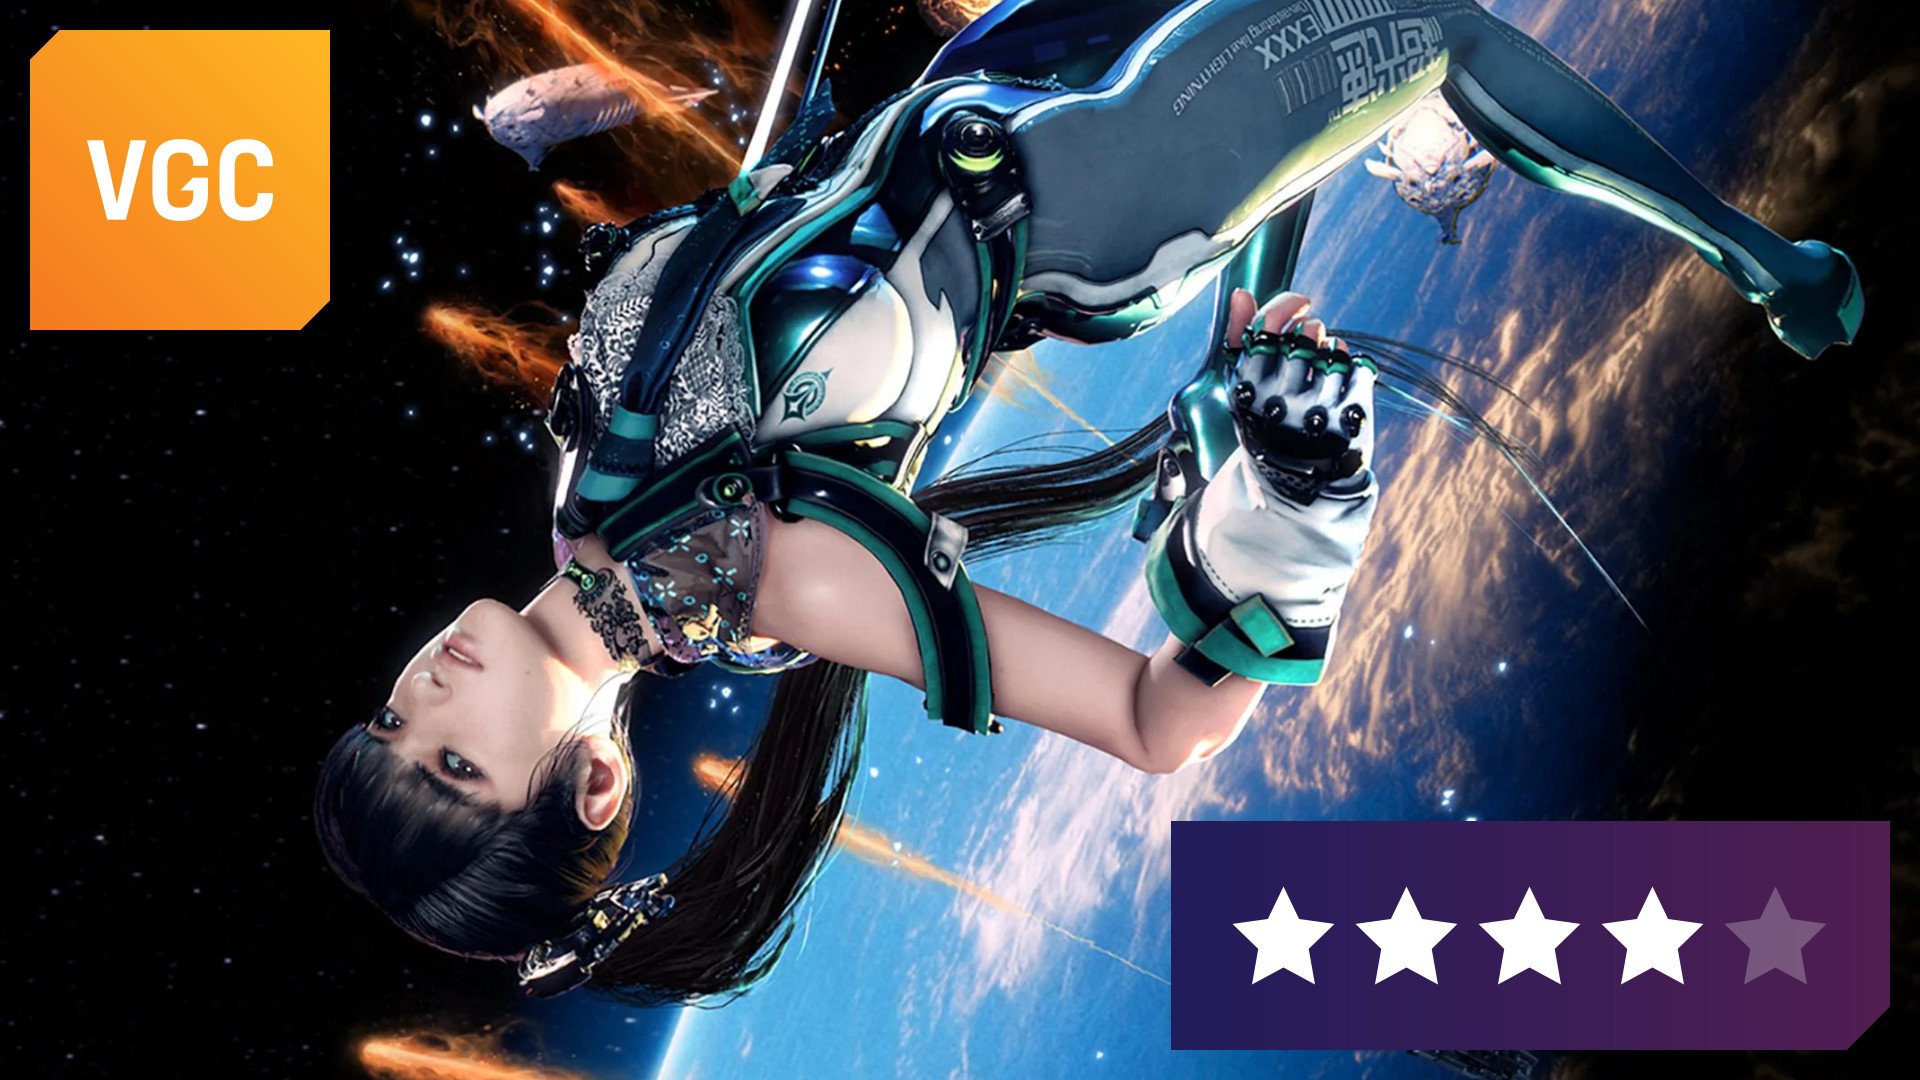 Review: Stellar Blade is one of the most mechanically satisfying action games of the generation - Video Games Chronicle